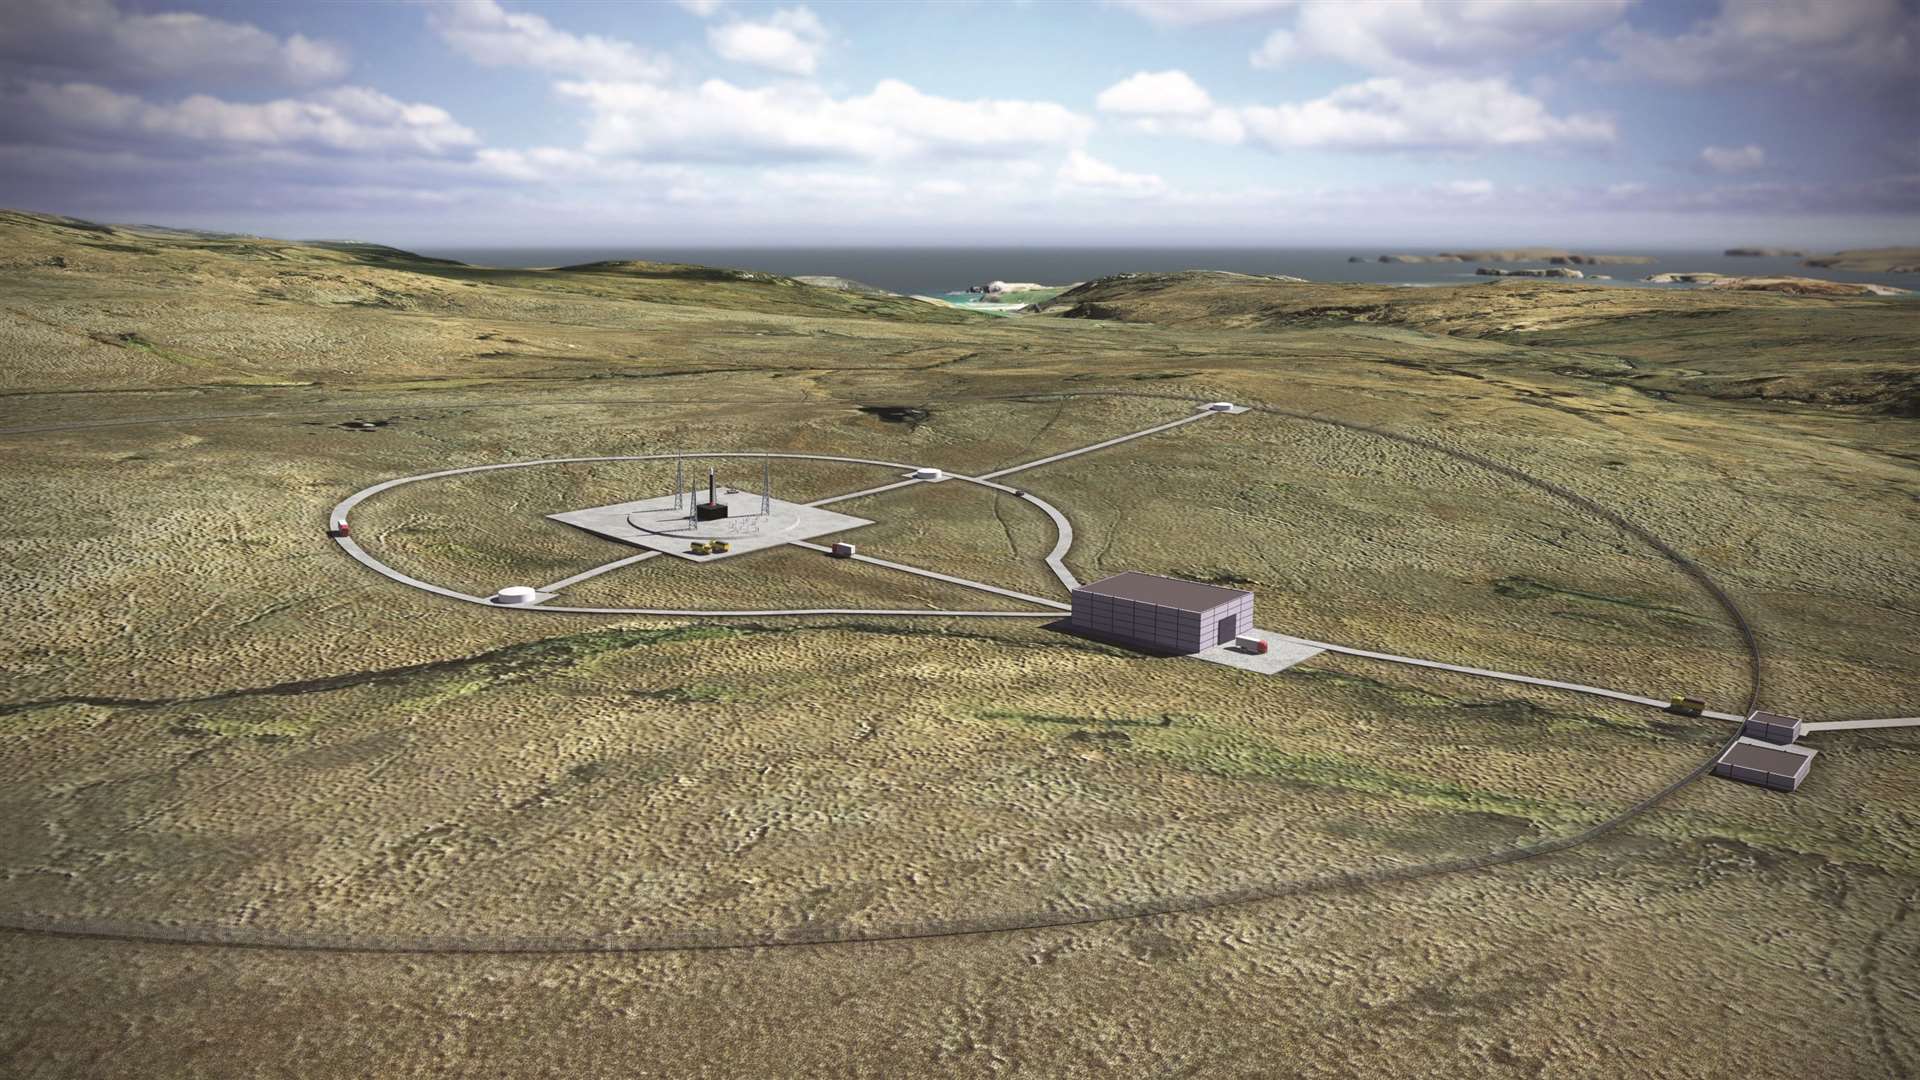 How the Sutherland spaceport site will look.